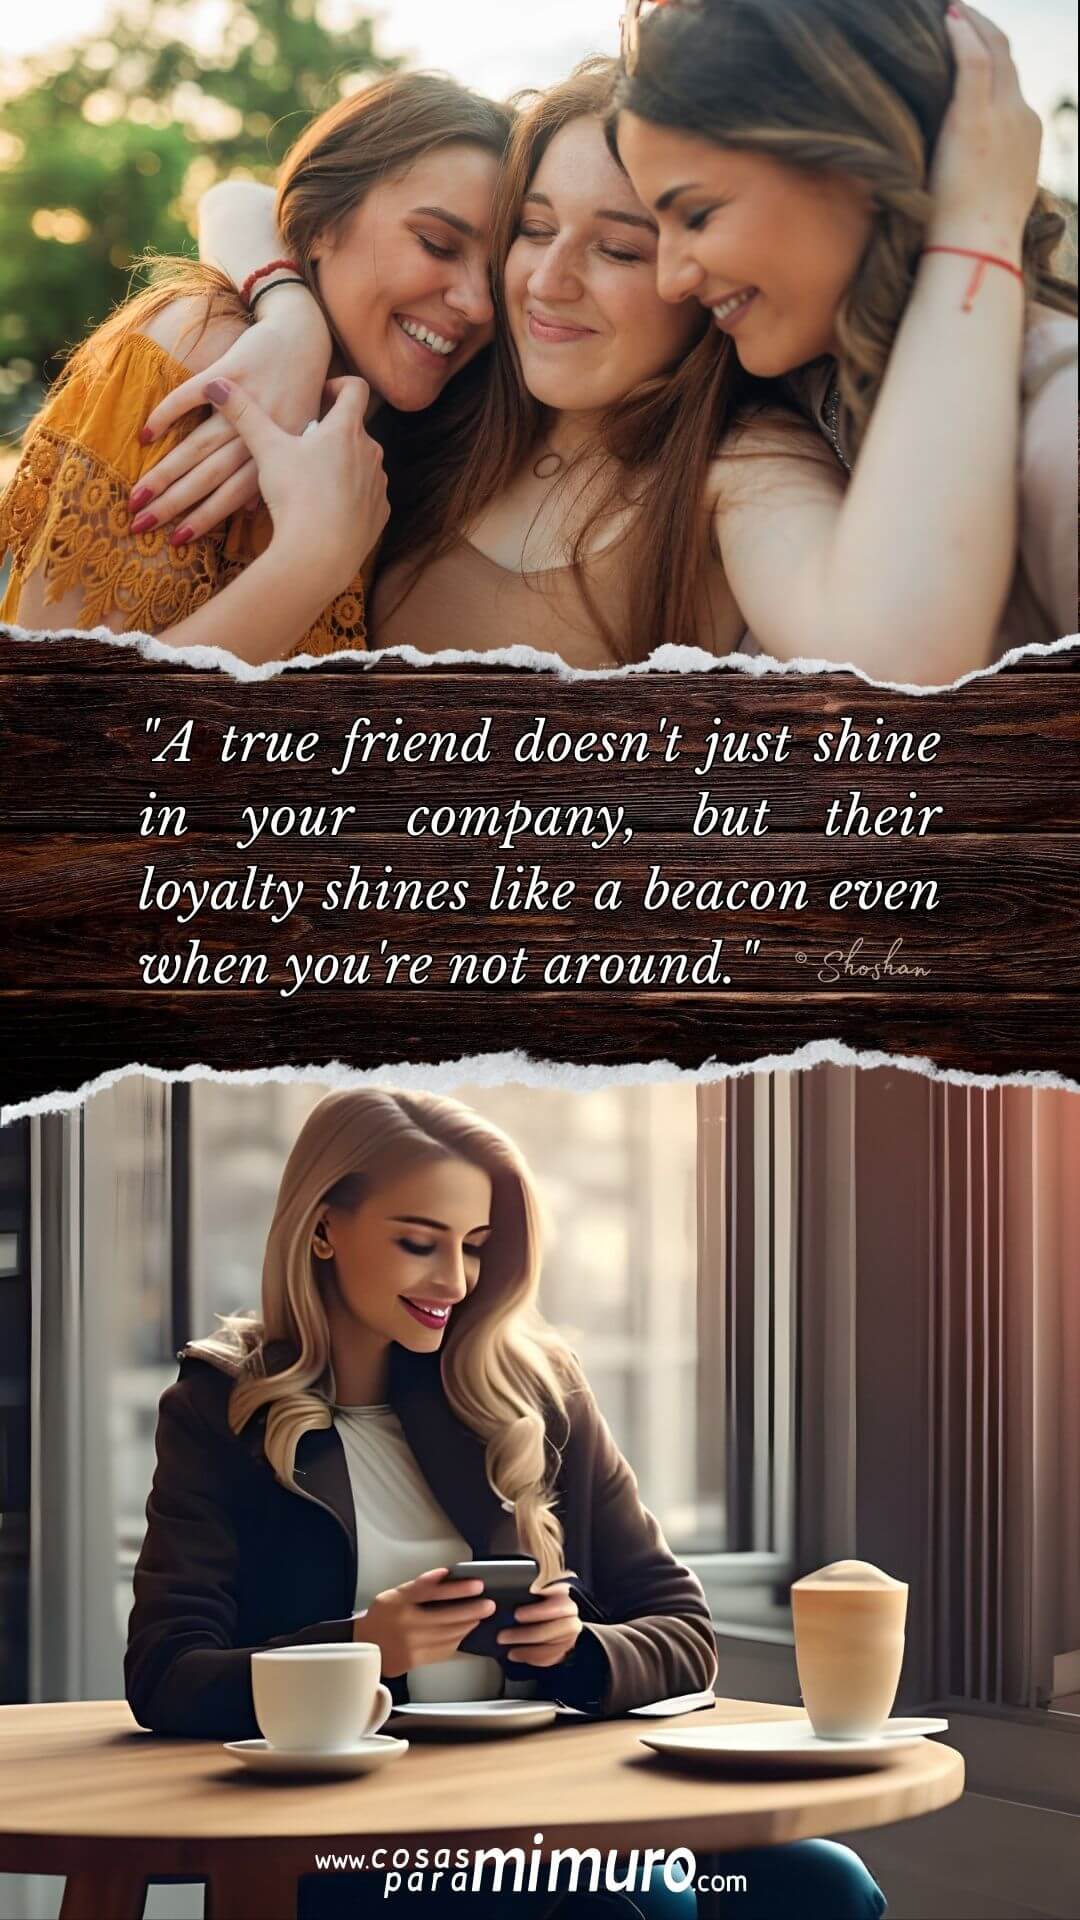 A true friend doesn't just shine in your company, but even when you're not around